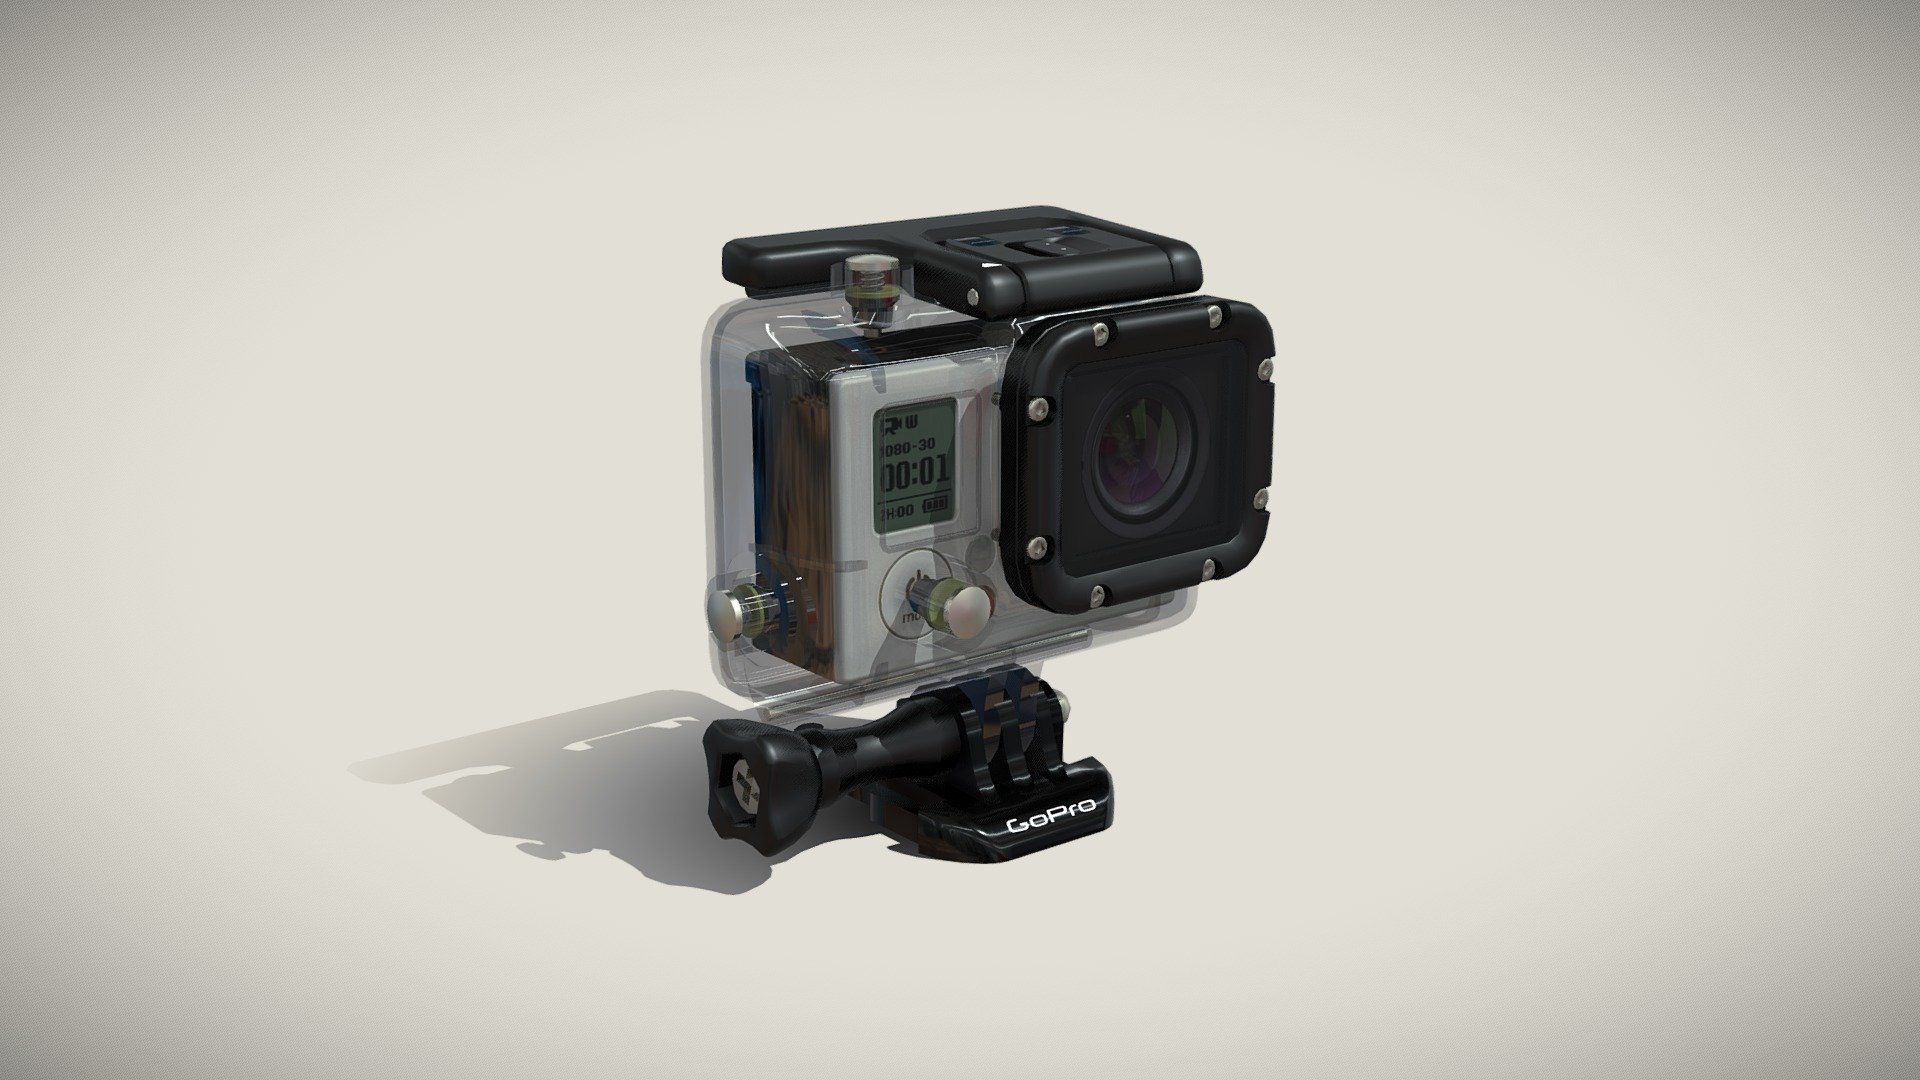 •   Let me present to you high-quality low-poly 3D model GoPro Hero3 camera with waterhousing.  Modeling was made with ortho-photos of real action camera that is why all details of design are recreated most authentically.

•    This model consists of a few meshes, it is low-polygonal and it has five materials for Waterhousing and three materials for Camera.

•   The total of the main textures is 4. Resolution of all textures is 2048 pixels square aspect ratio in .png format. Also there is original texture file .PSD format in separate archive.

•   Polygon count of the model is – 16430.

•   The model has correct dimensions in real-world scale. All parts grouped and named correctly.

•   To use the model in other 3D programs there are scenes saved in formats .fbx, .obj, .DAE, .max (2010 version).

Note: If you see some artifacts on the textures, it means compression works in the Viewer. We recommend setting HD quality for textures. But anyway, original textures have no artifacts 3d model